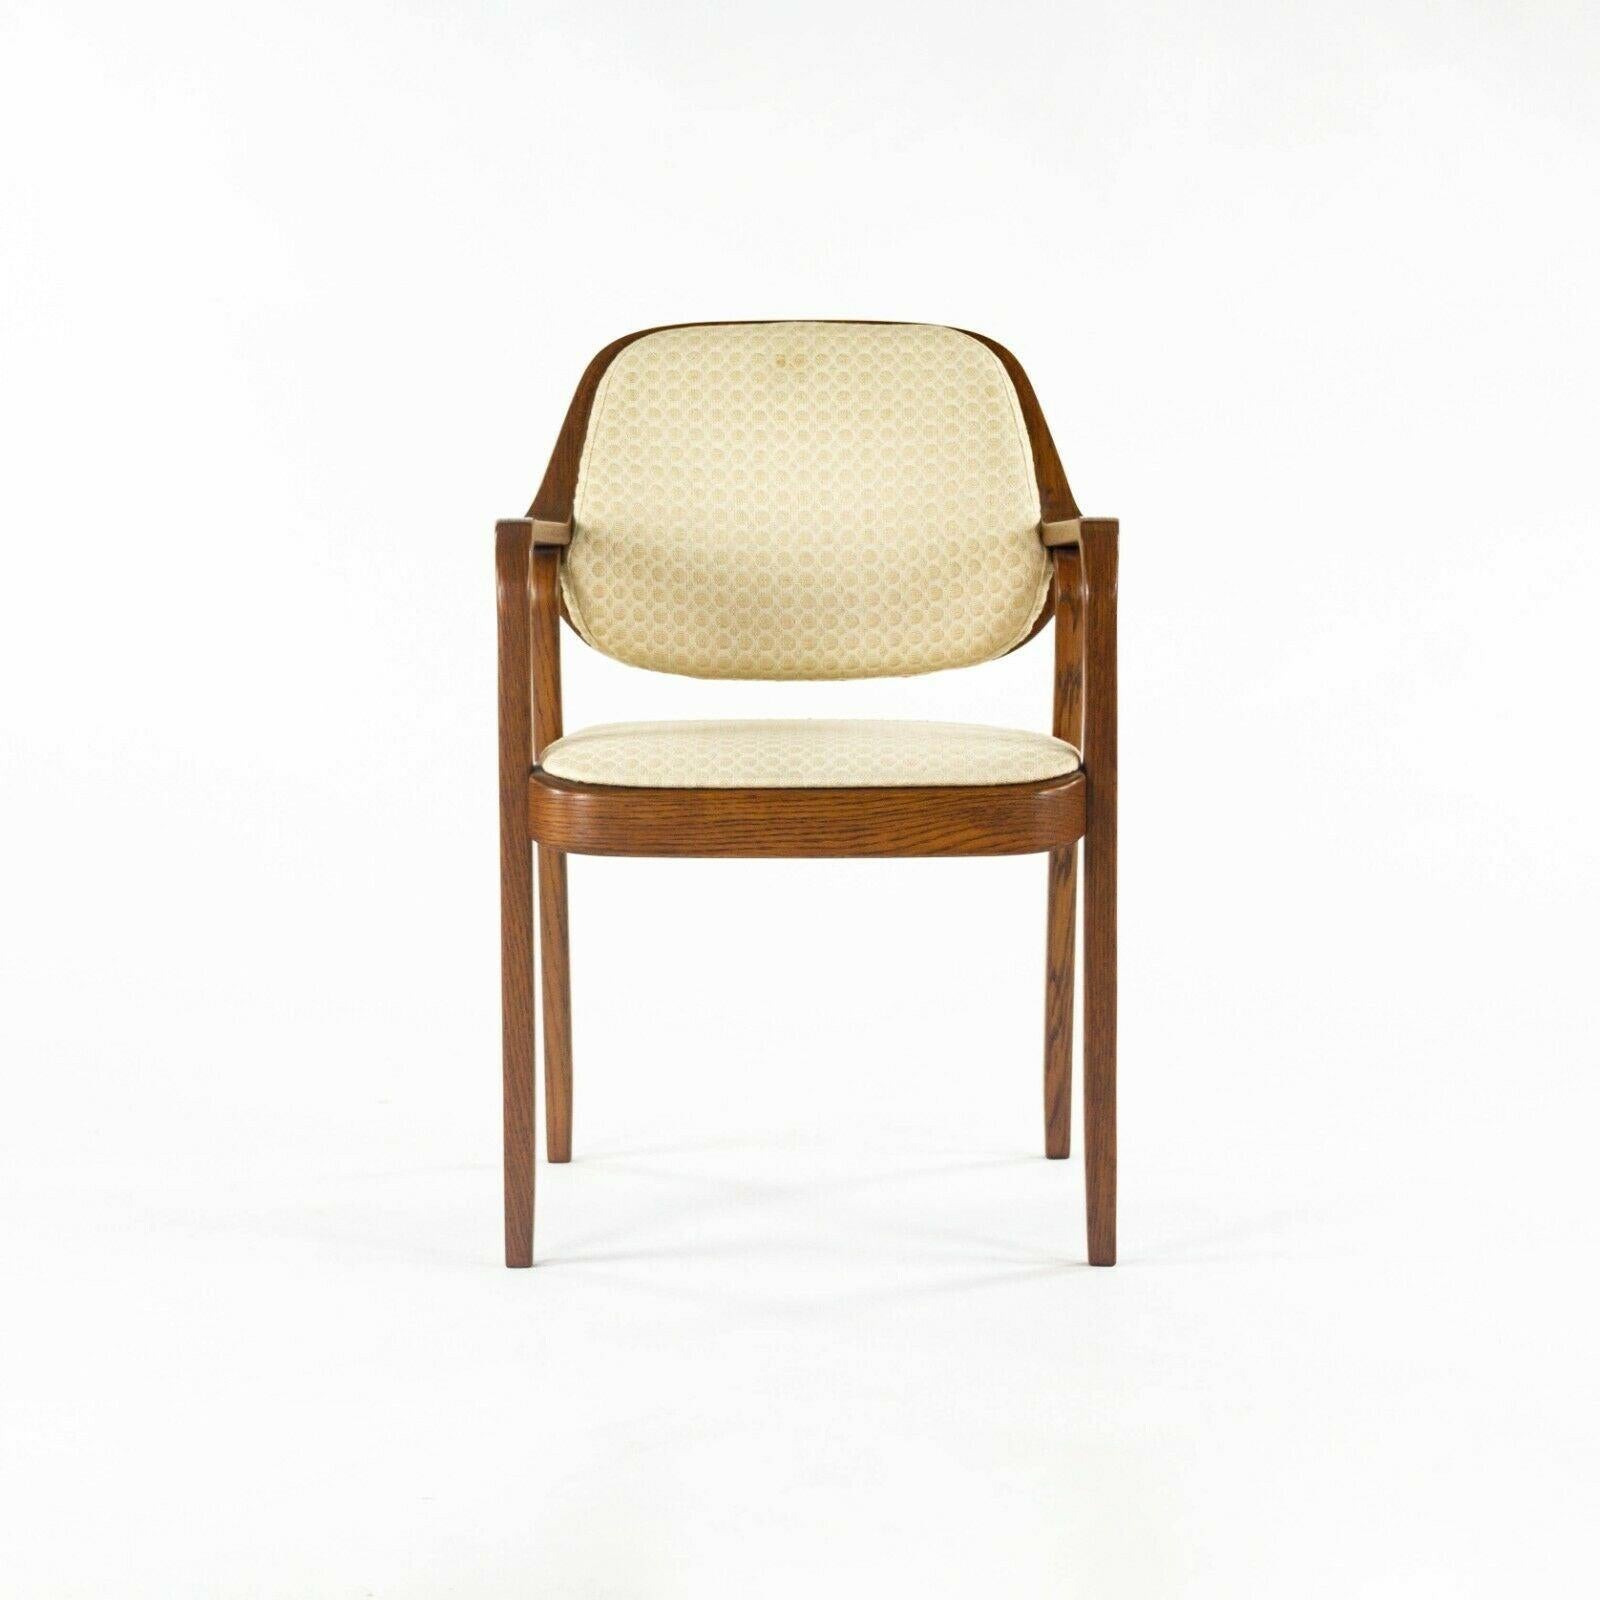 Listed for sale is a pair of iconic No. 1105 chairs, designed by Don Petitt for Knoll. This is a notable pair that came from the home of a Knoll employee, who worked at the company for over 50 years. The chairs were both specified in a dark oak